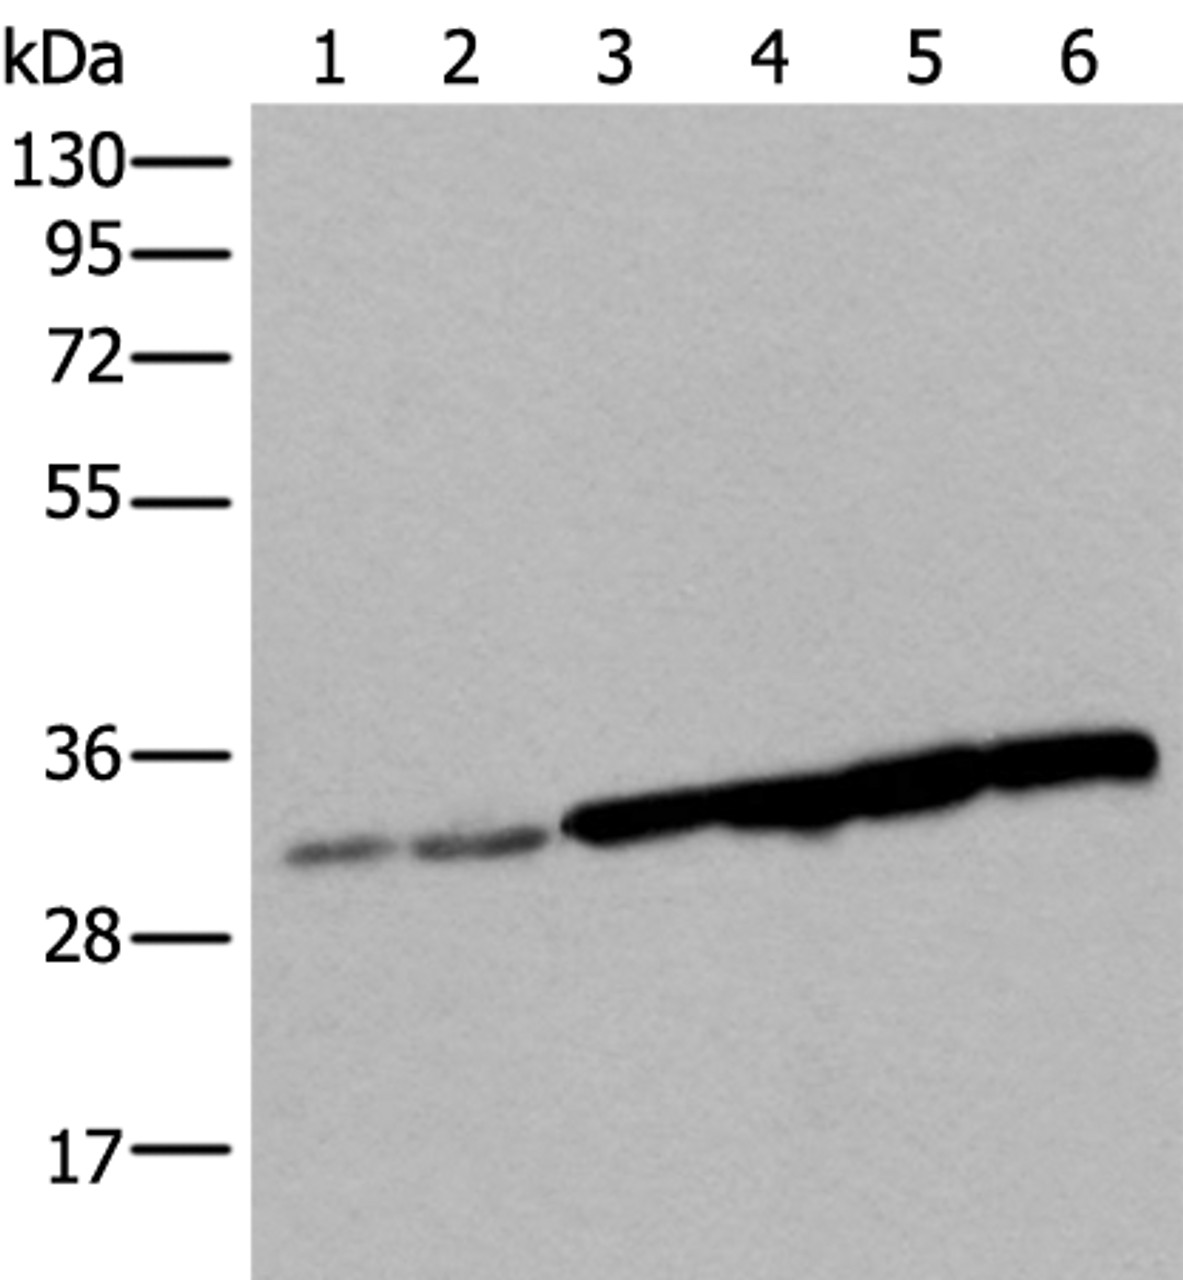 Western blot analysis of 293T cell Hela cell HEPG2 cell and A549 cell lysates  using SNRPA Polyclonal Antibody at dilution of 1:250